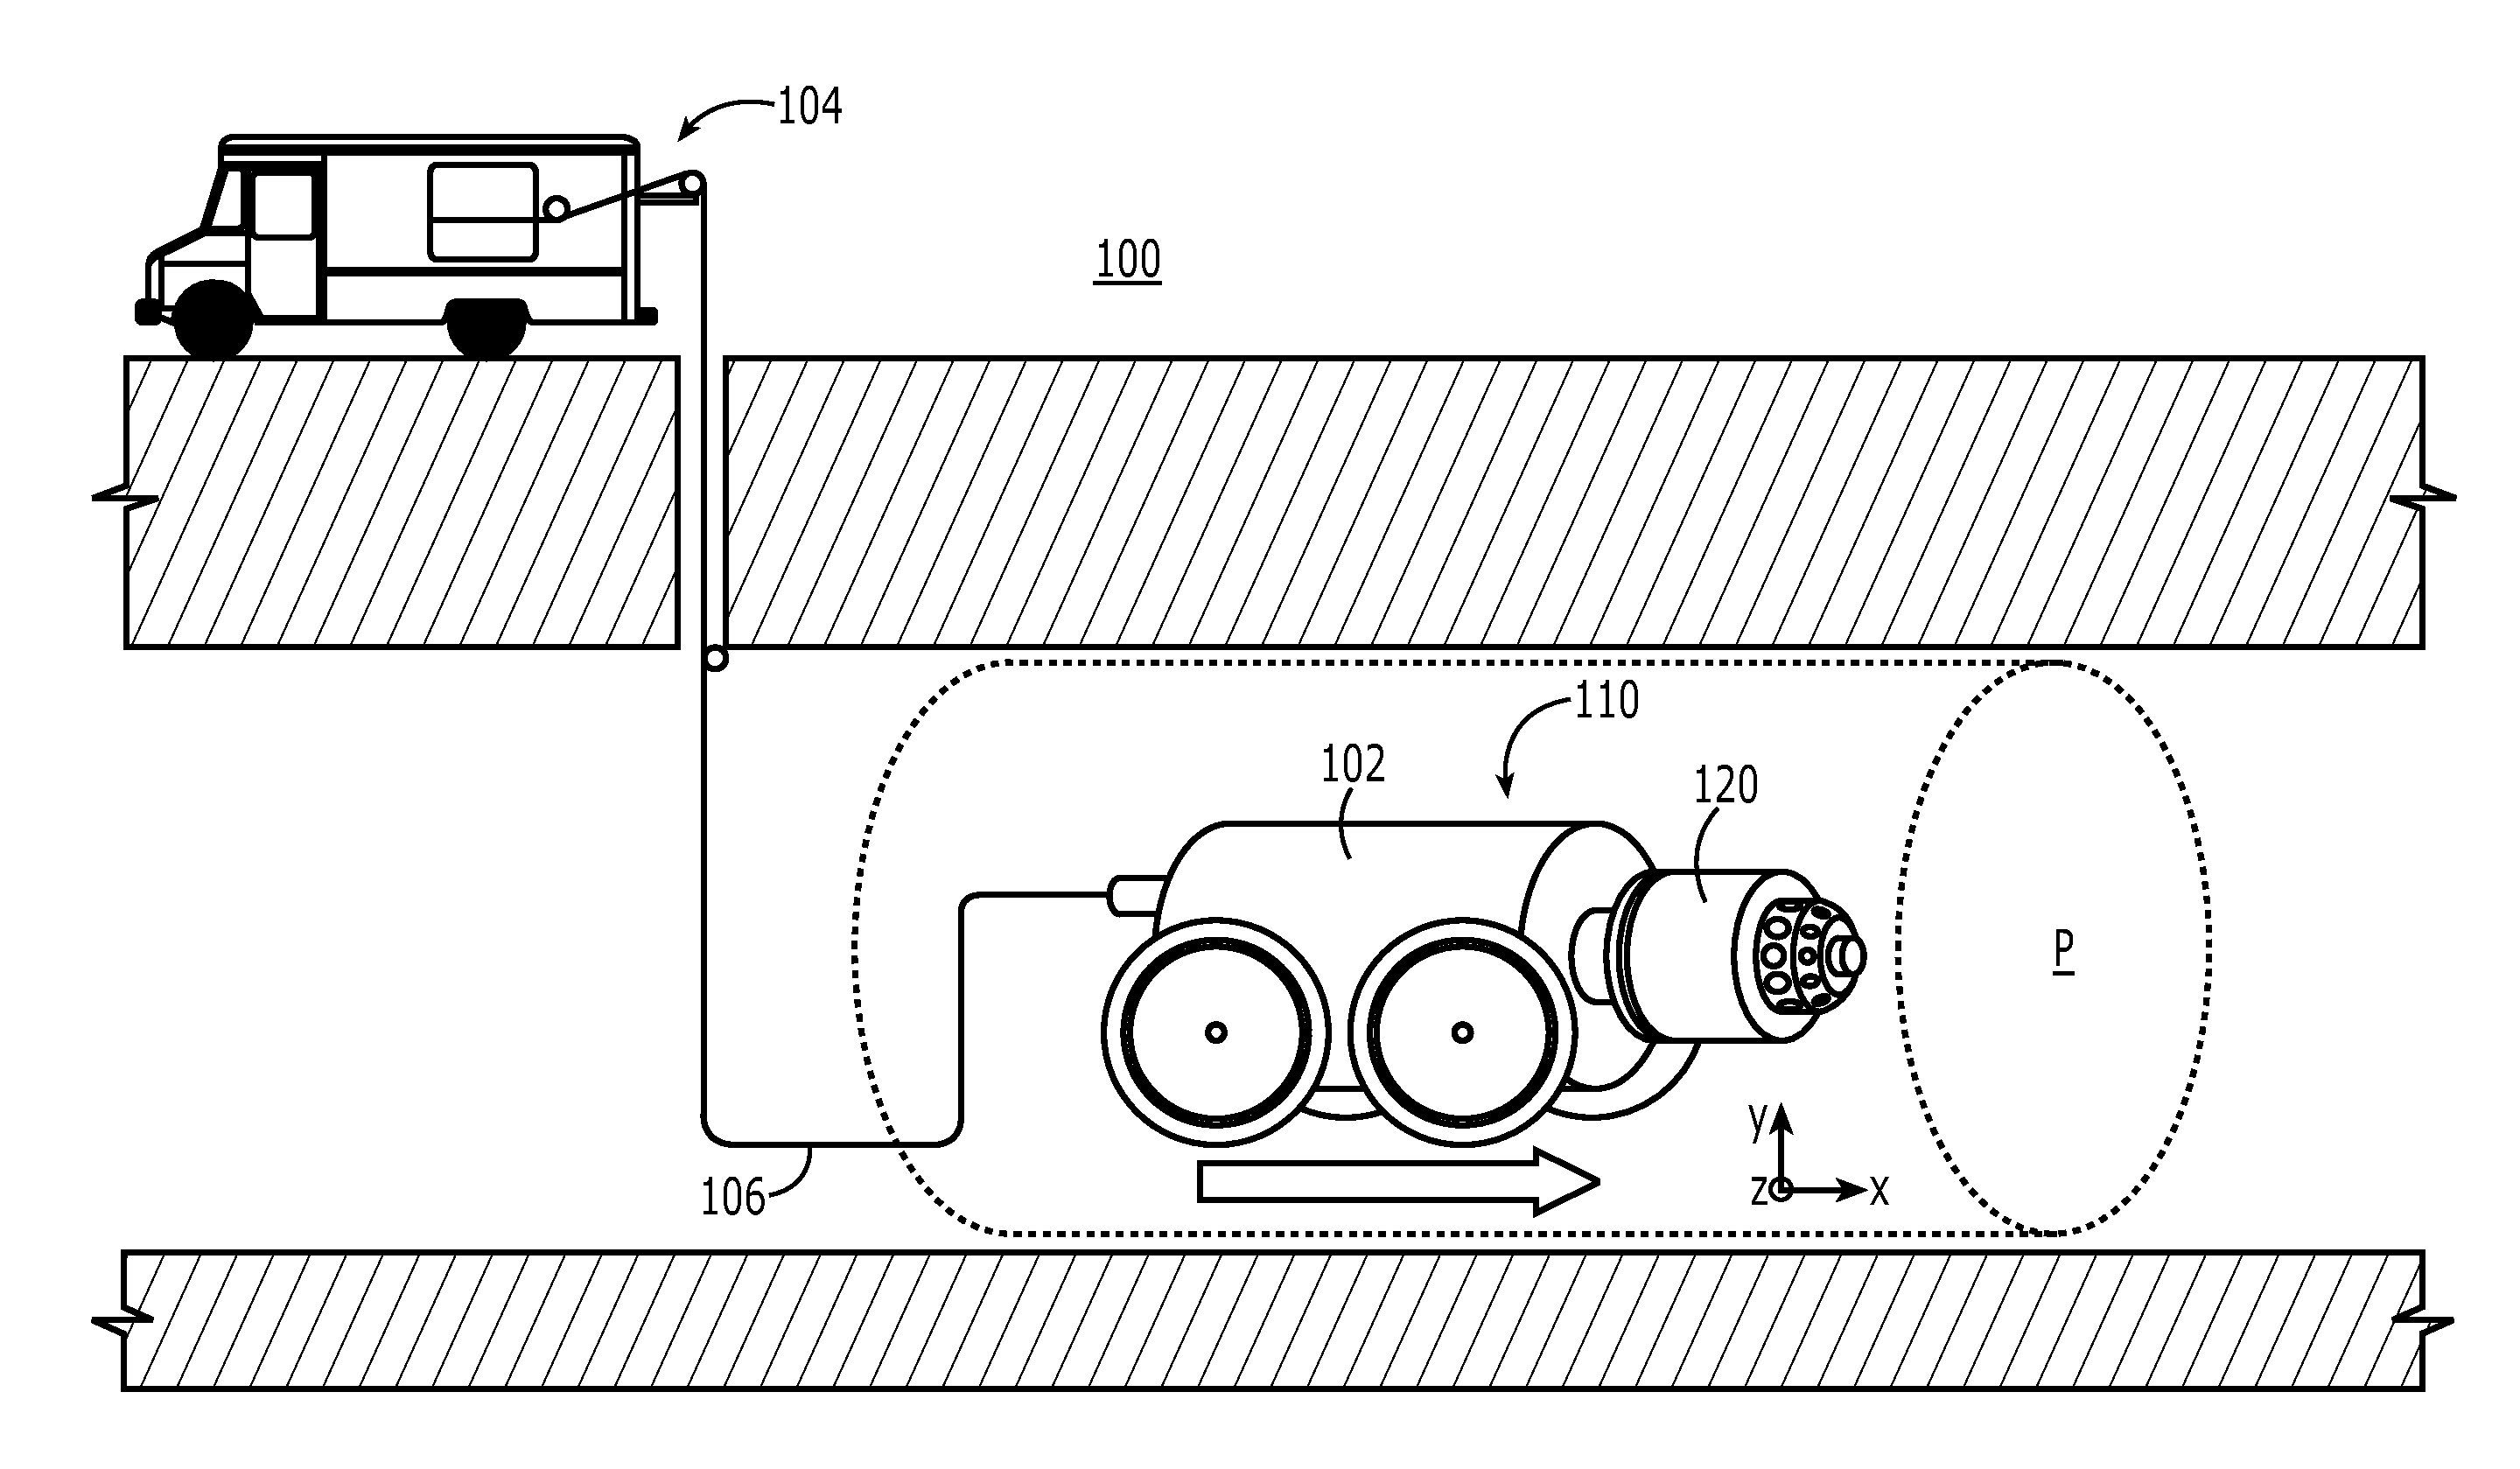 Camera-based pipeline inspection system